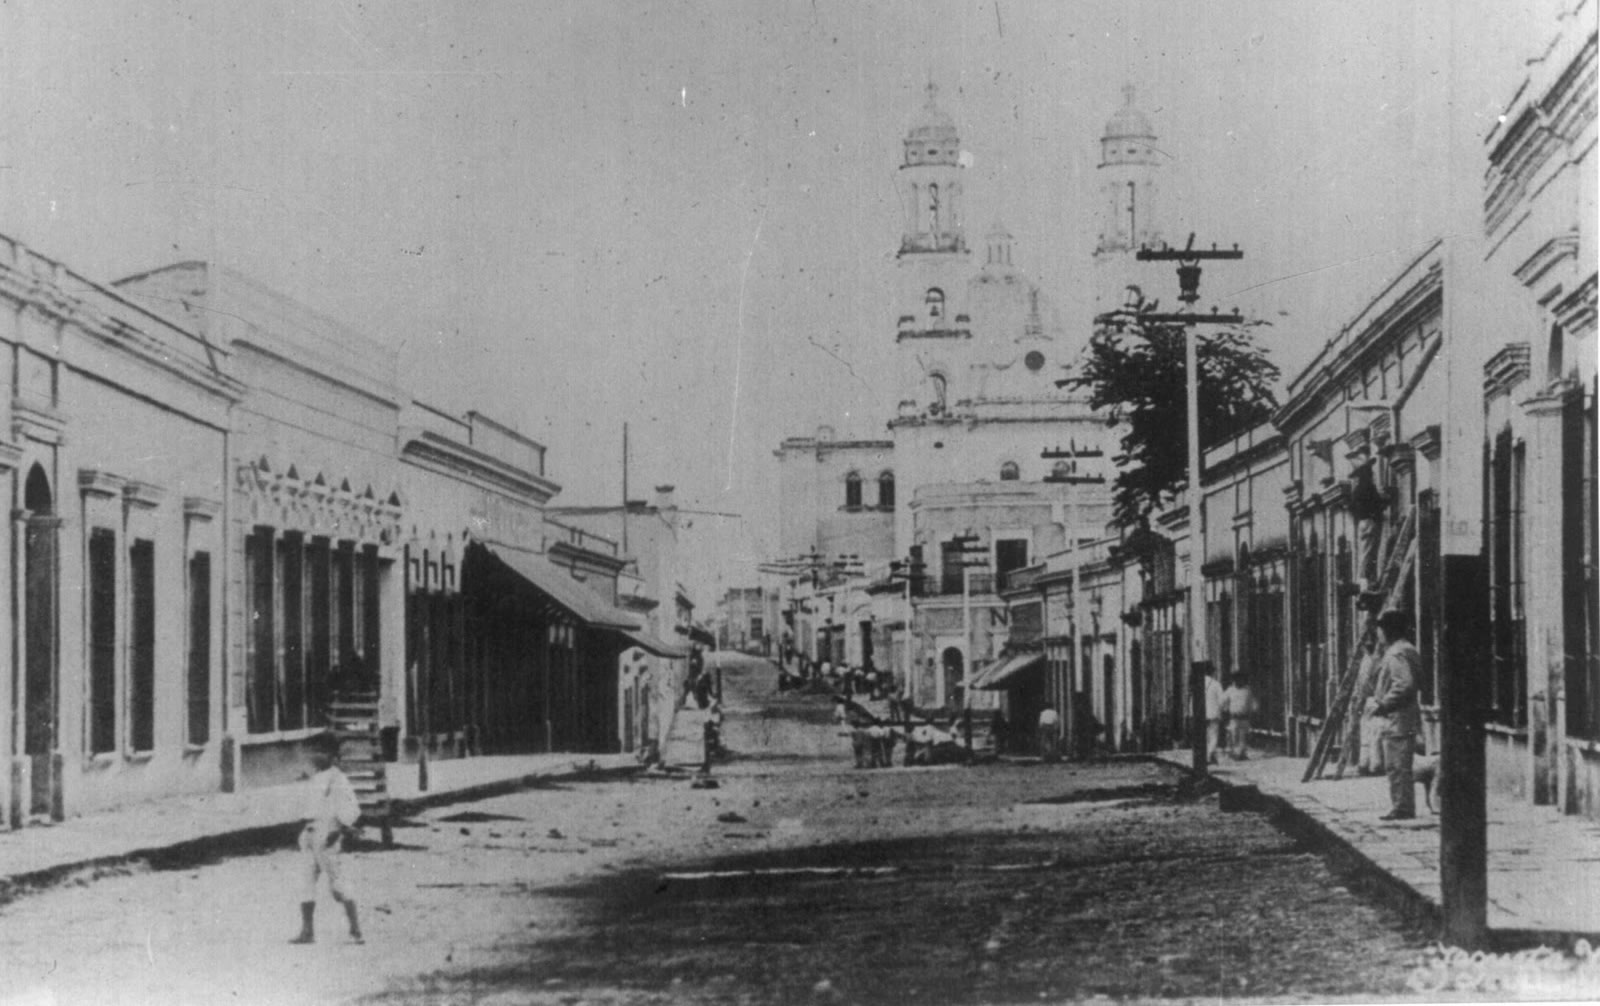 Undated Photo of Culiacán, probably 19th Century